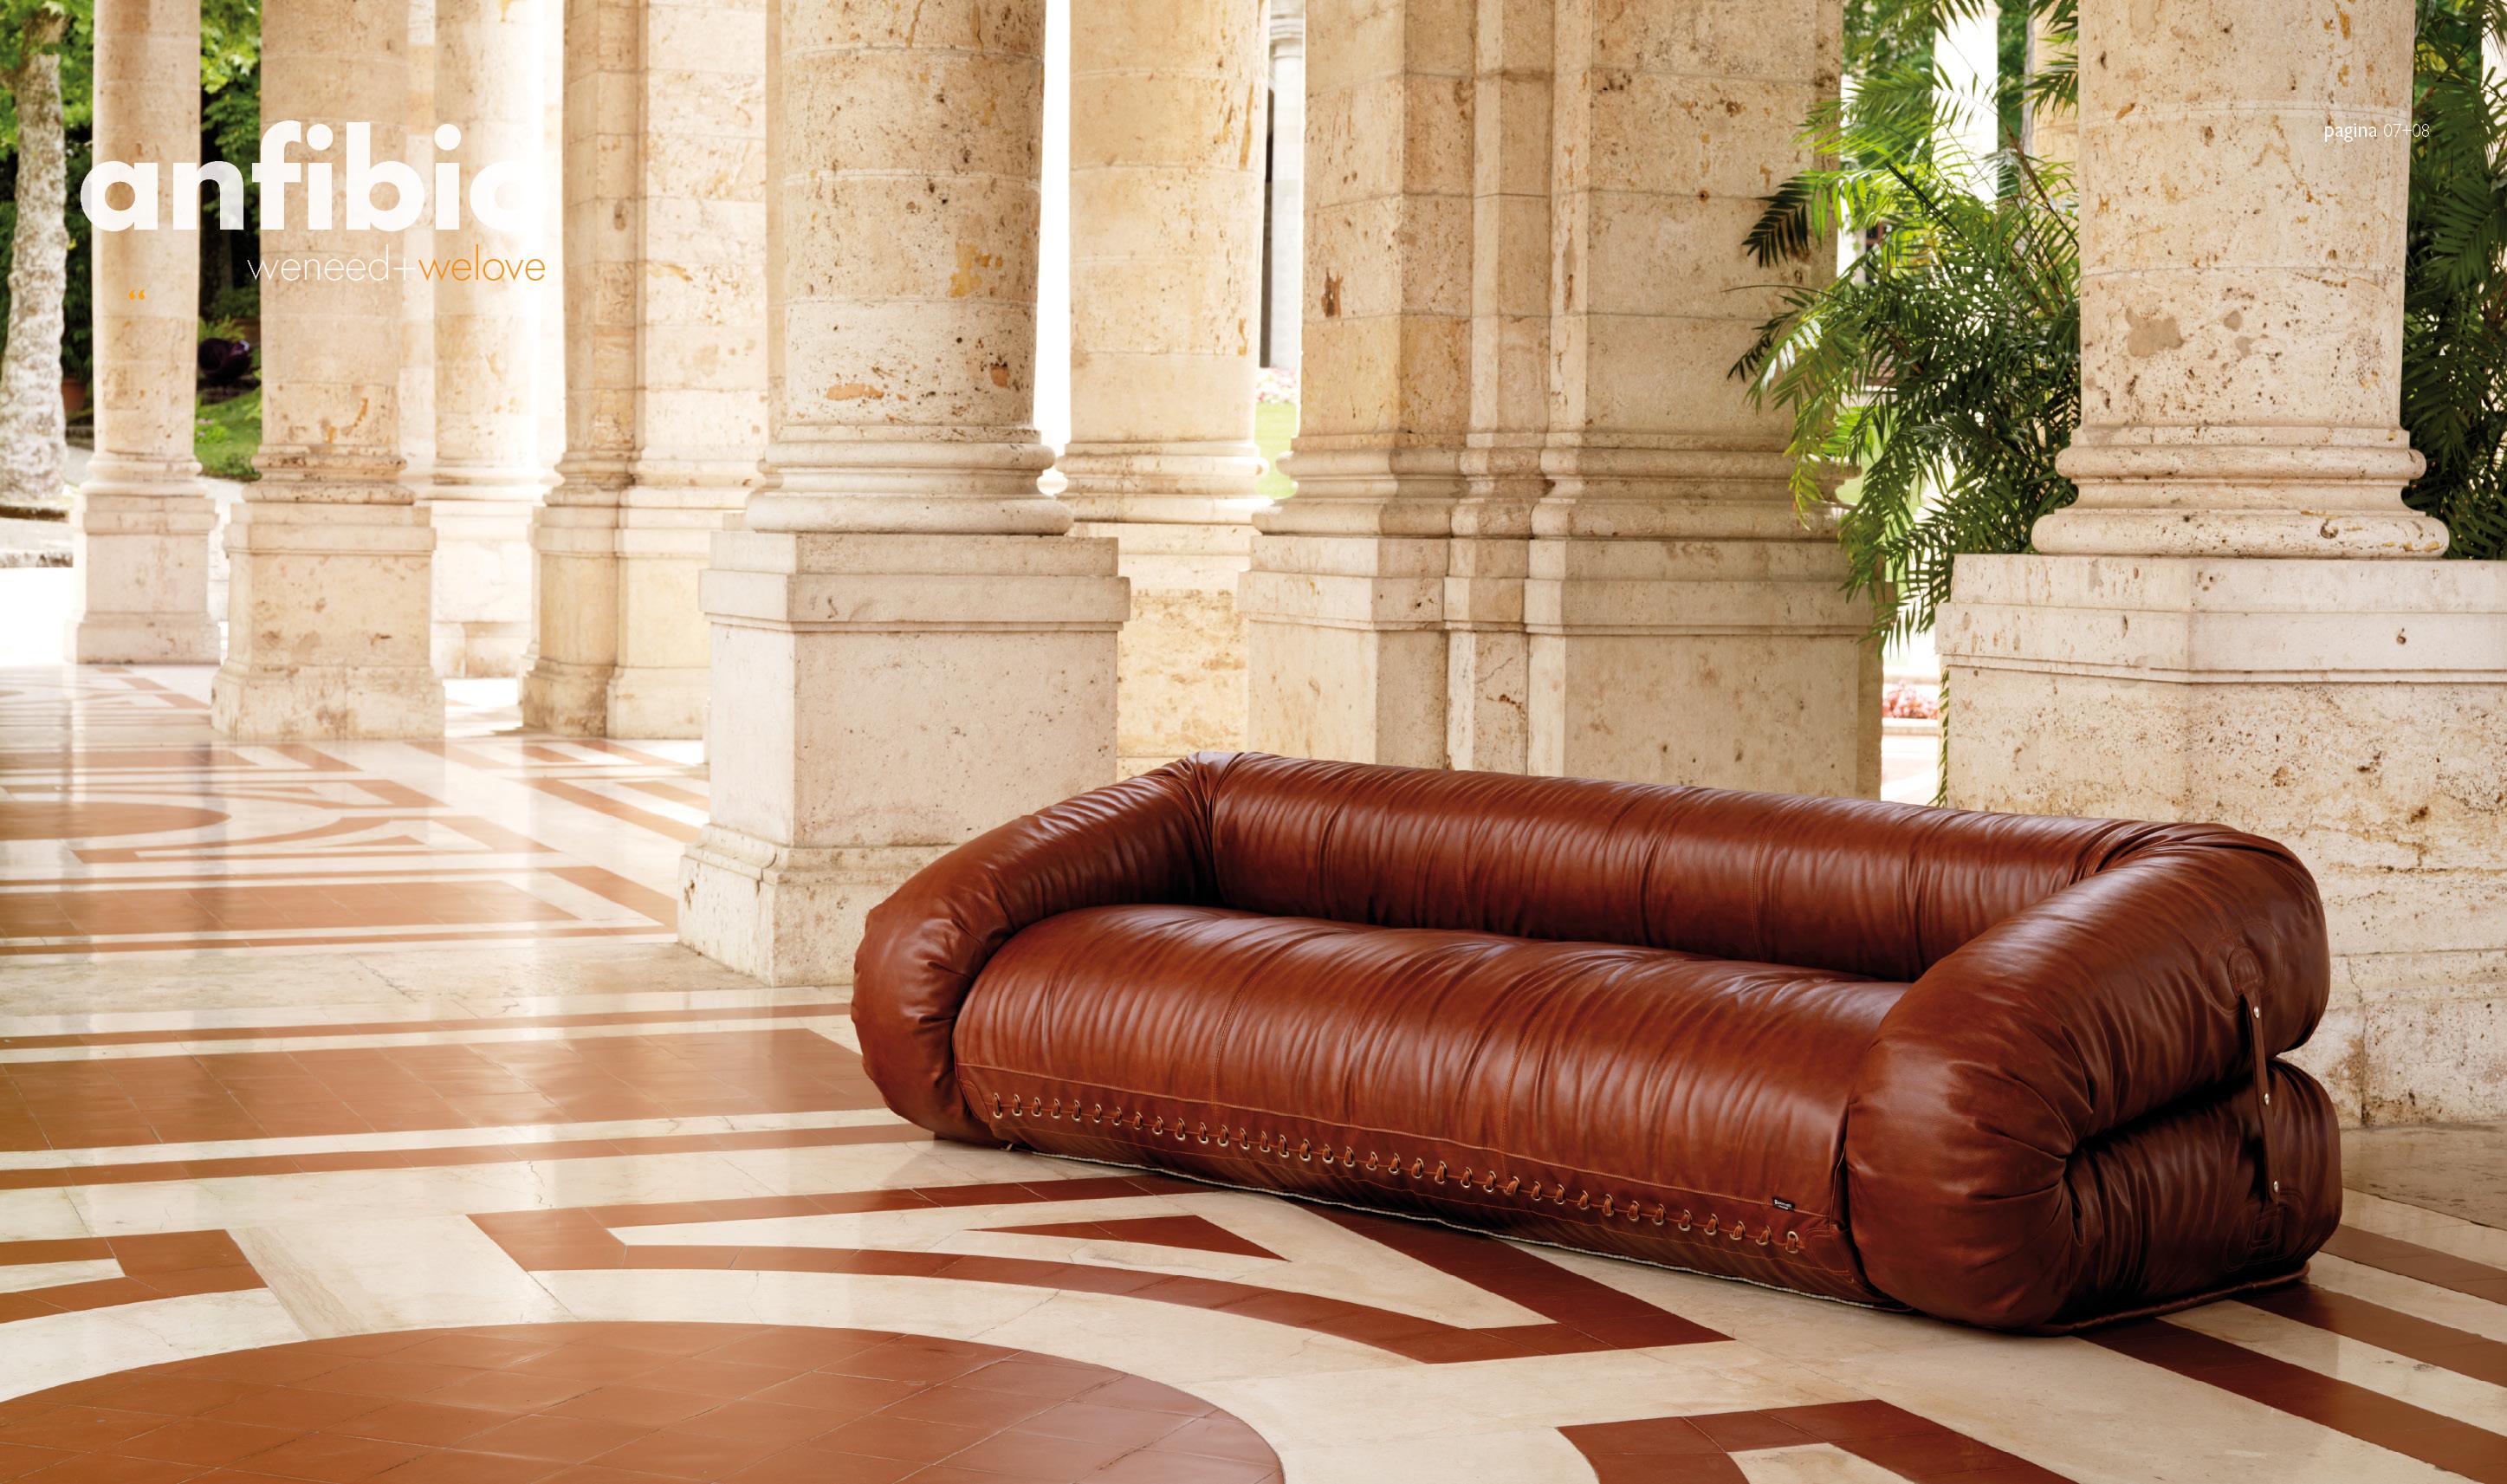 The bed-sofa, designed by Alessandro Becchi together with the giovannetti staff ha recently celebrated its 50 years.
Its history is full of important events and participations. A piece considered a “classic” of Italian Design, interpreting all over